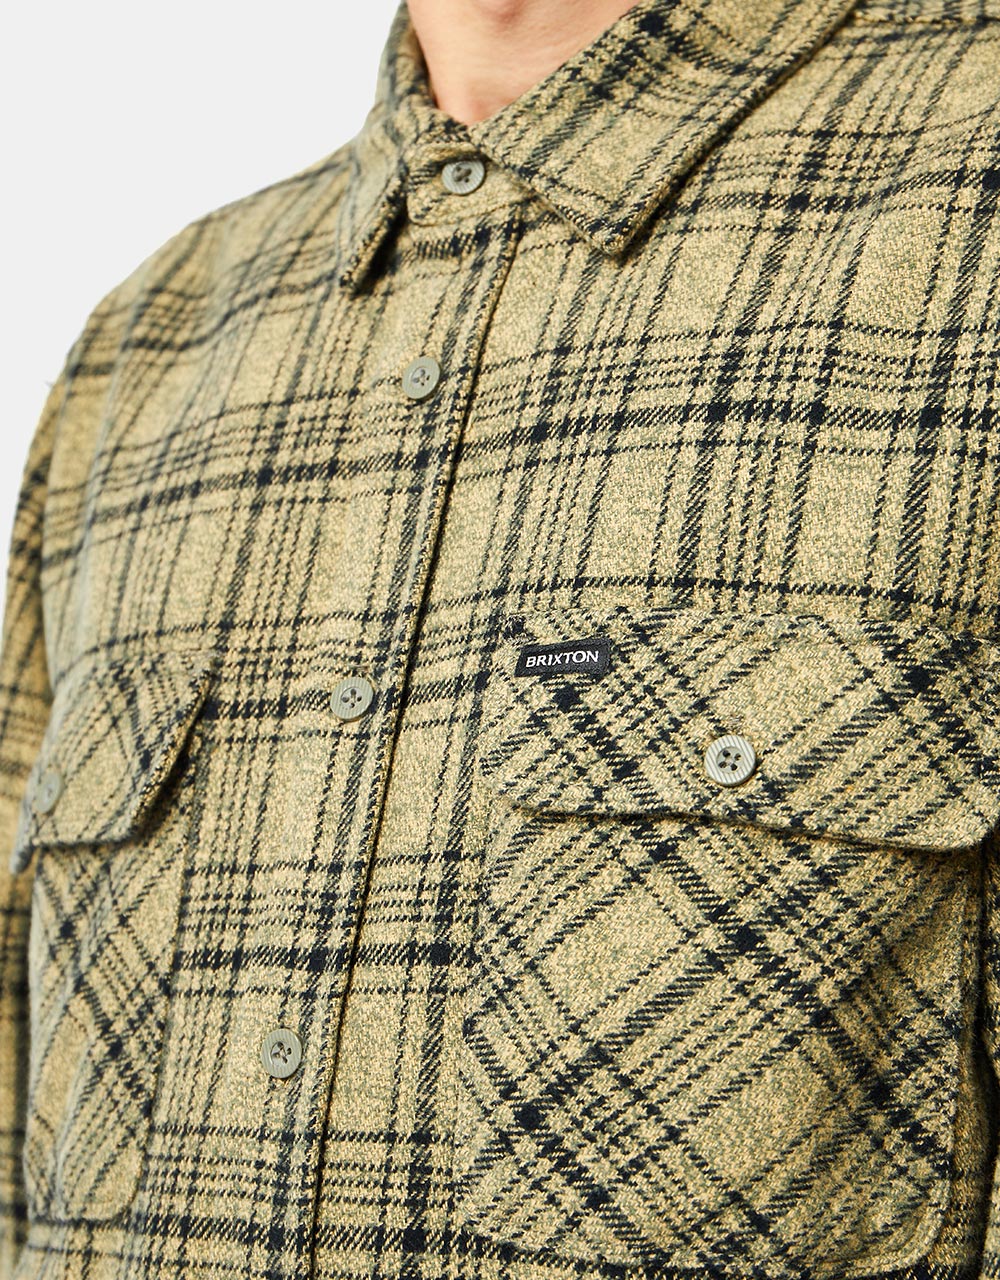 Brixton Bowery Heavy Weight L/S Flannel Shirt - Military Olive/Black